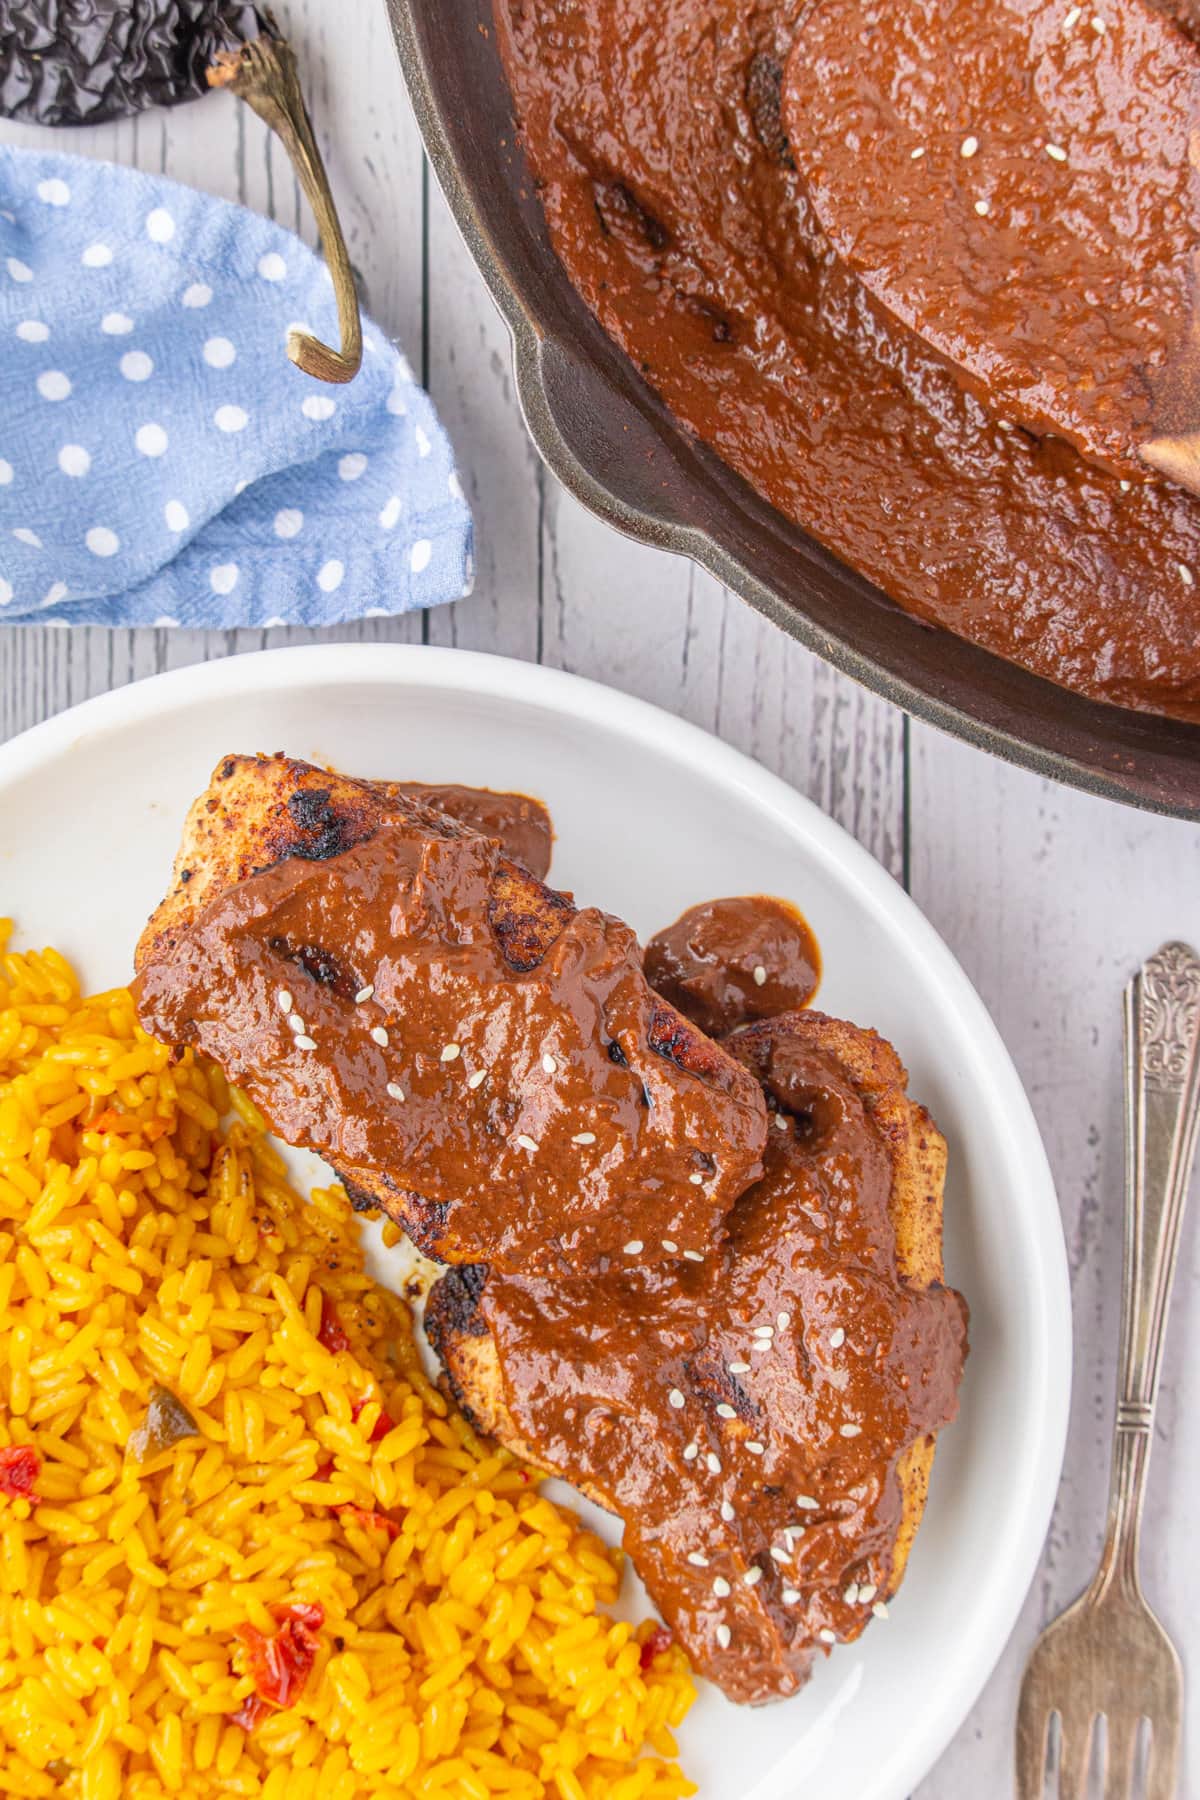 Mole sauce spooned over grilled chicken on a plate. Serving suggestion.